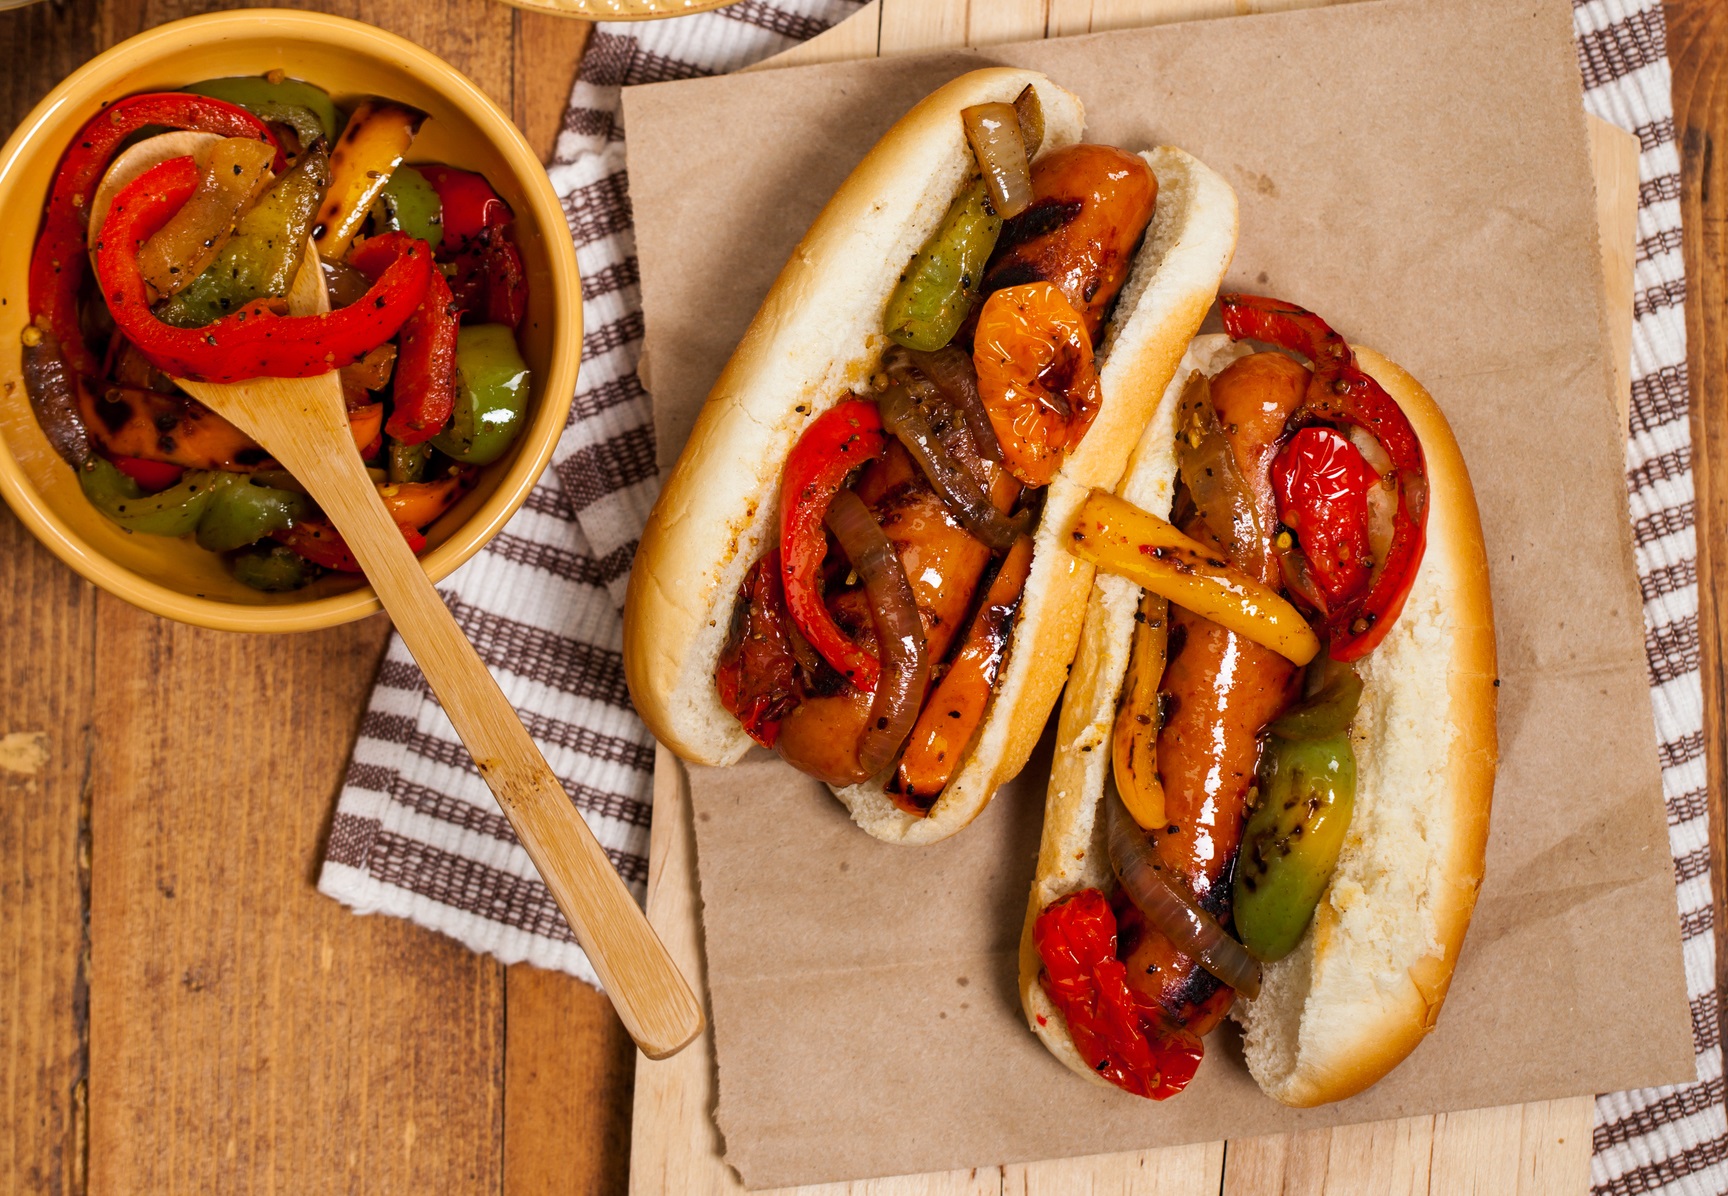 Two chicken sausage sandwiches with roasted peppers, and peppers in a bowl.